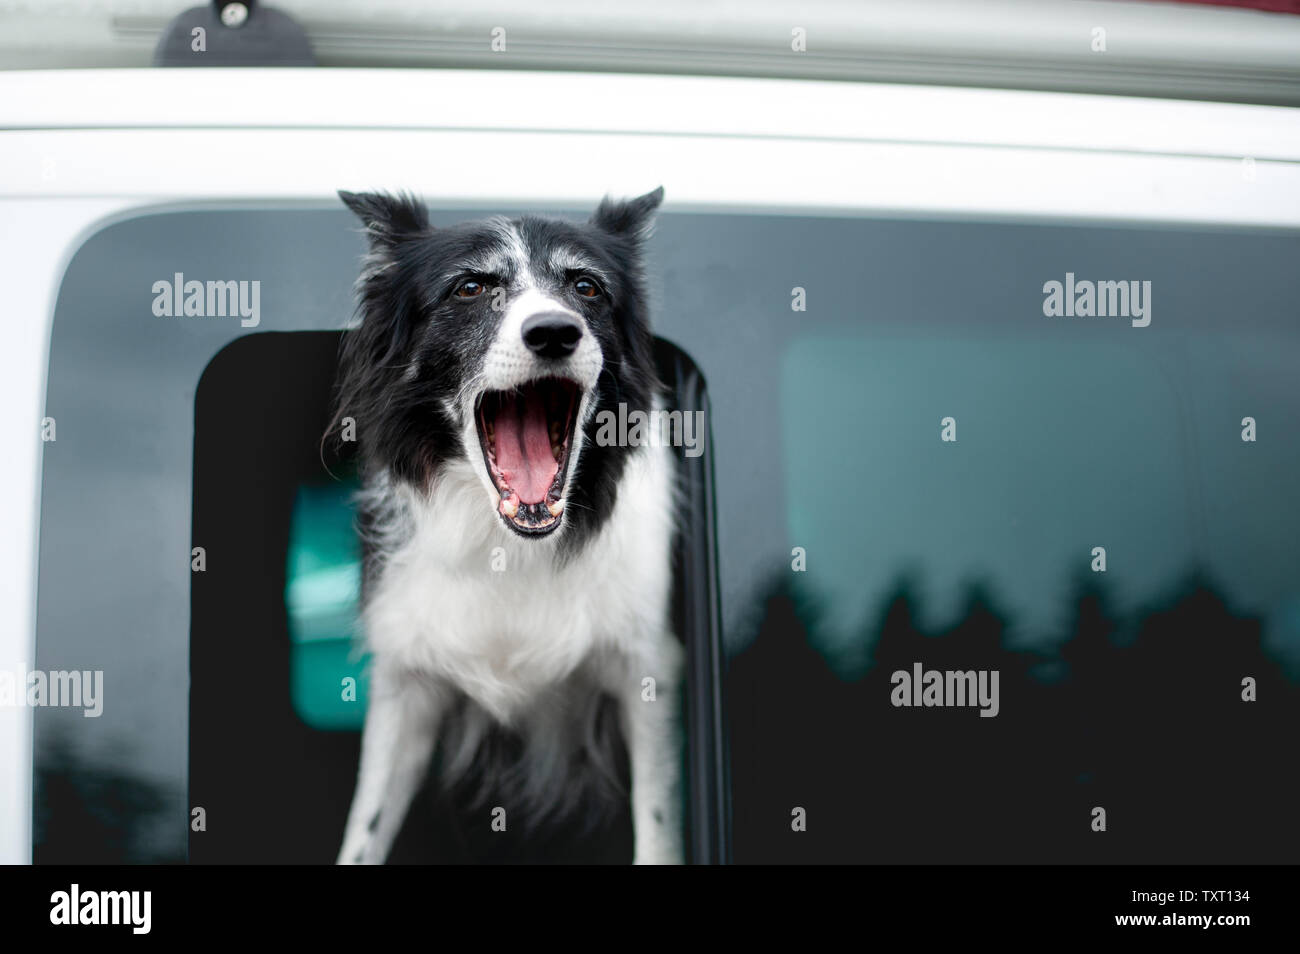 Dog Barking from Car Window. Old Black and White Border Collie Looking out of the Window. Stock Photo